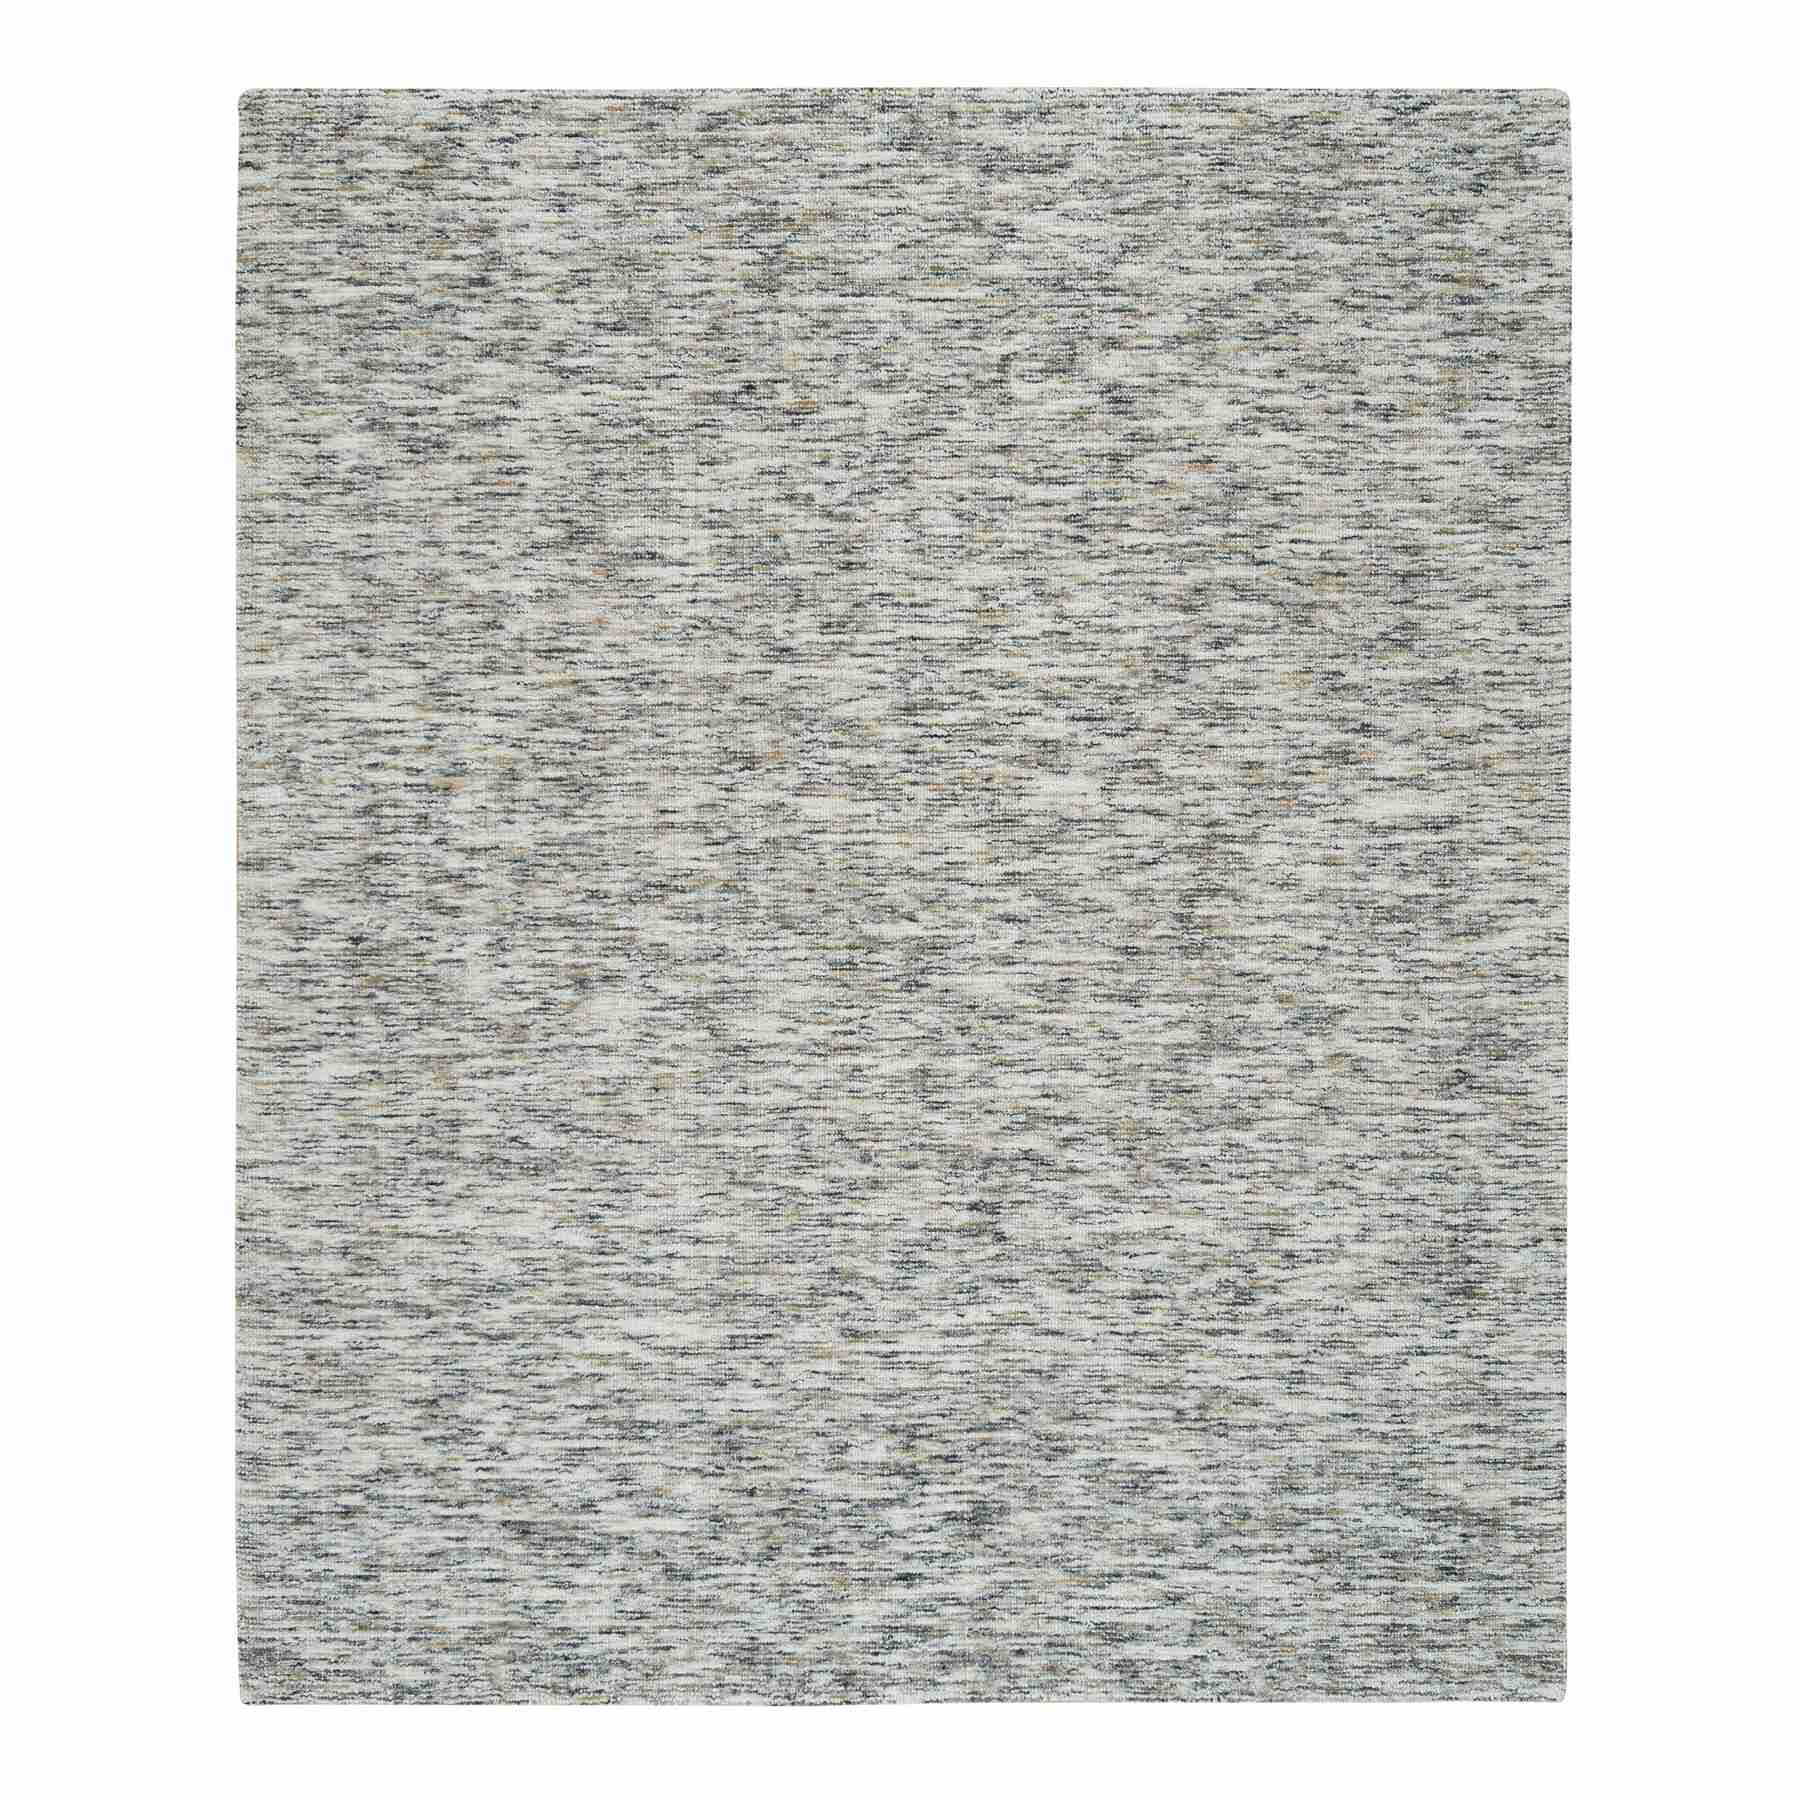 Earth Tone Colors, Pure Wool, Hand Loomed, Modern Striae Design, Soft to the Touch Oriental Rug